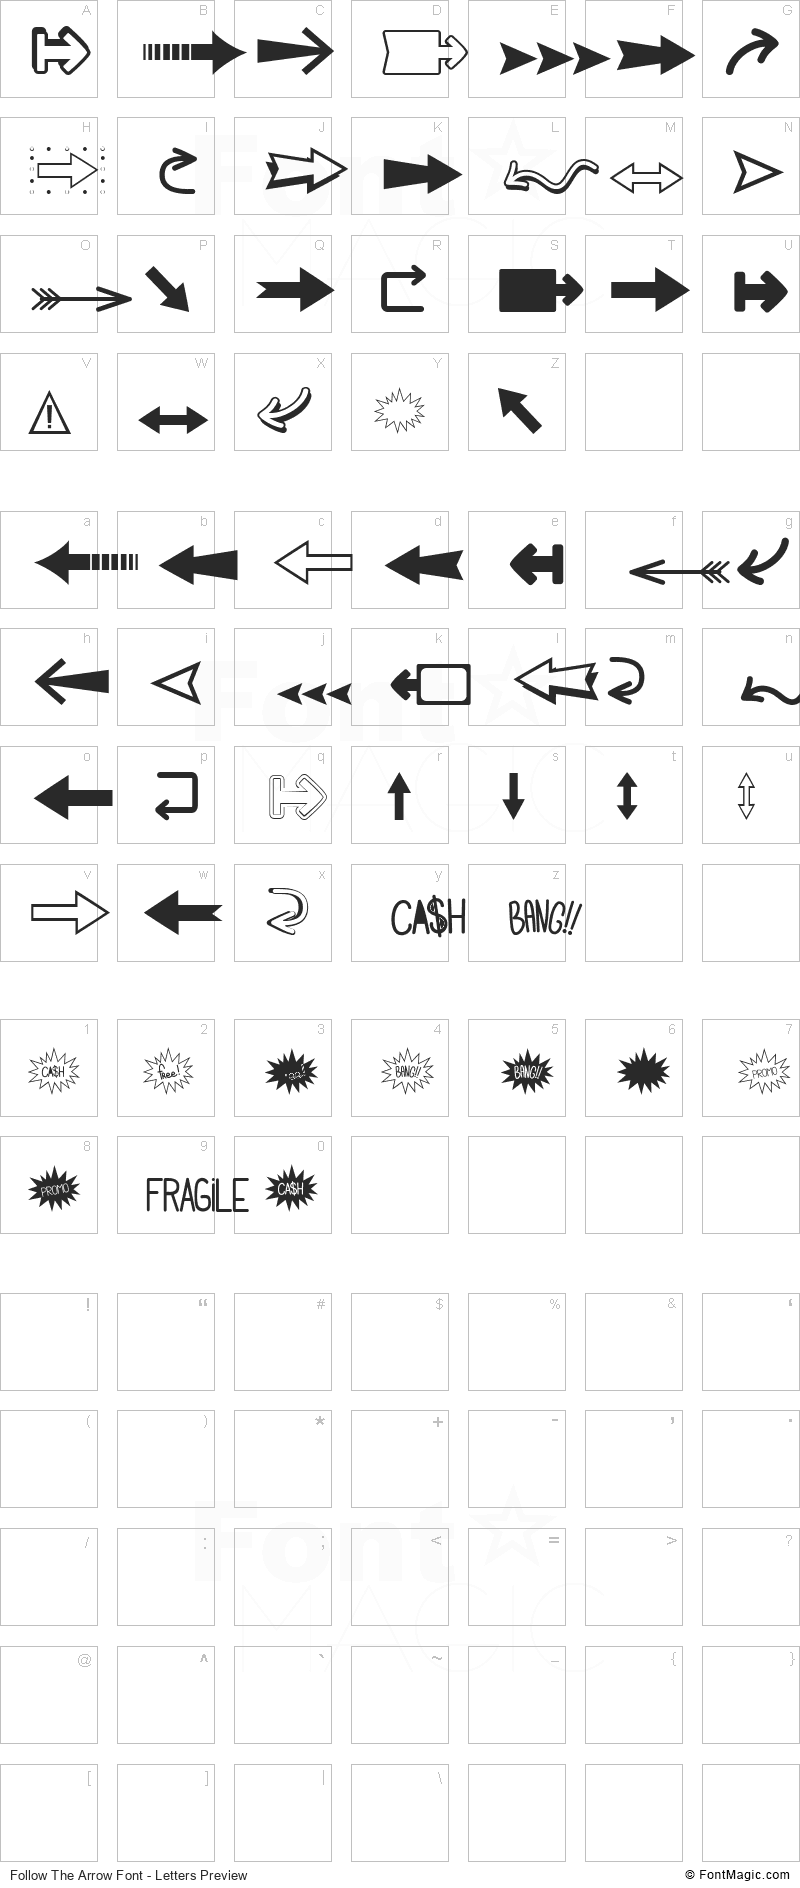 Follow The Arrow Font - All Latters Preview Chart